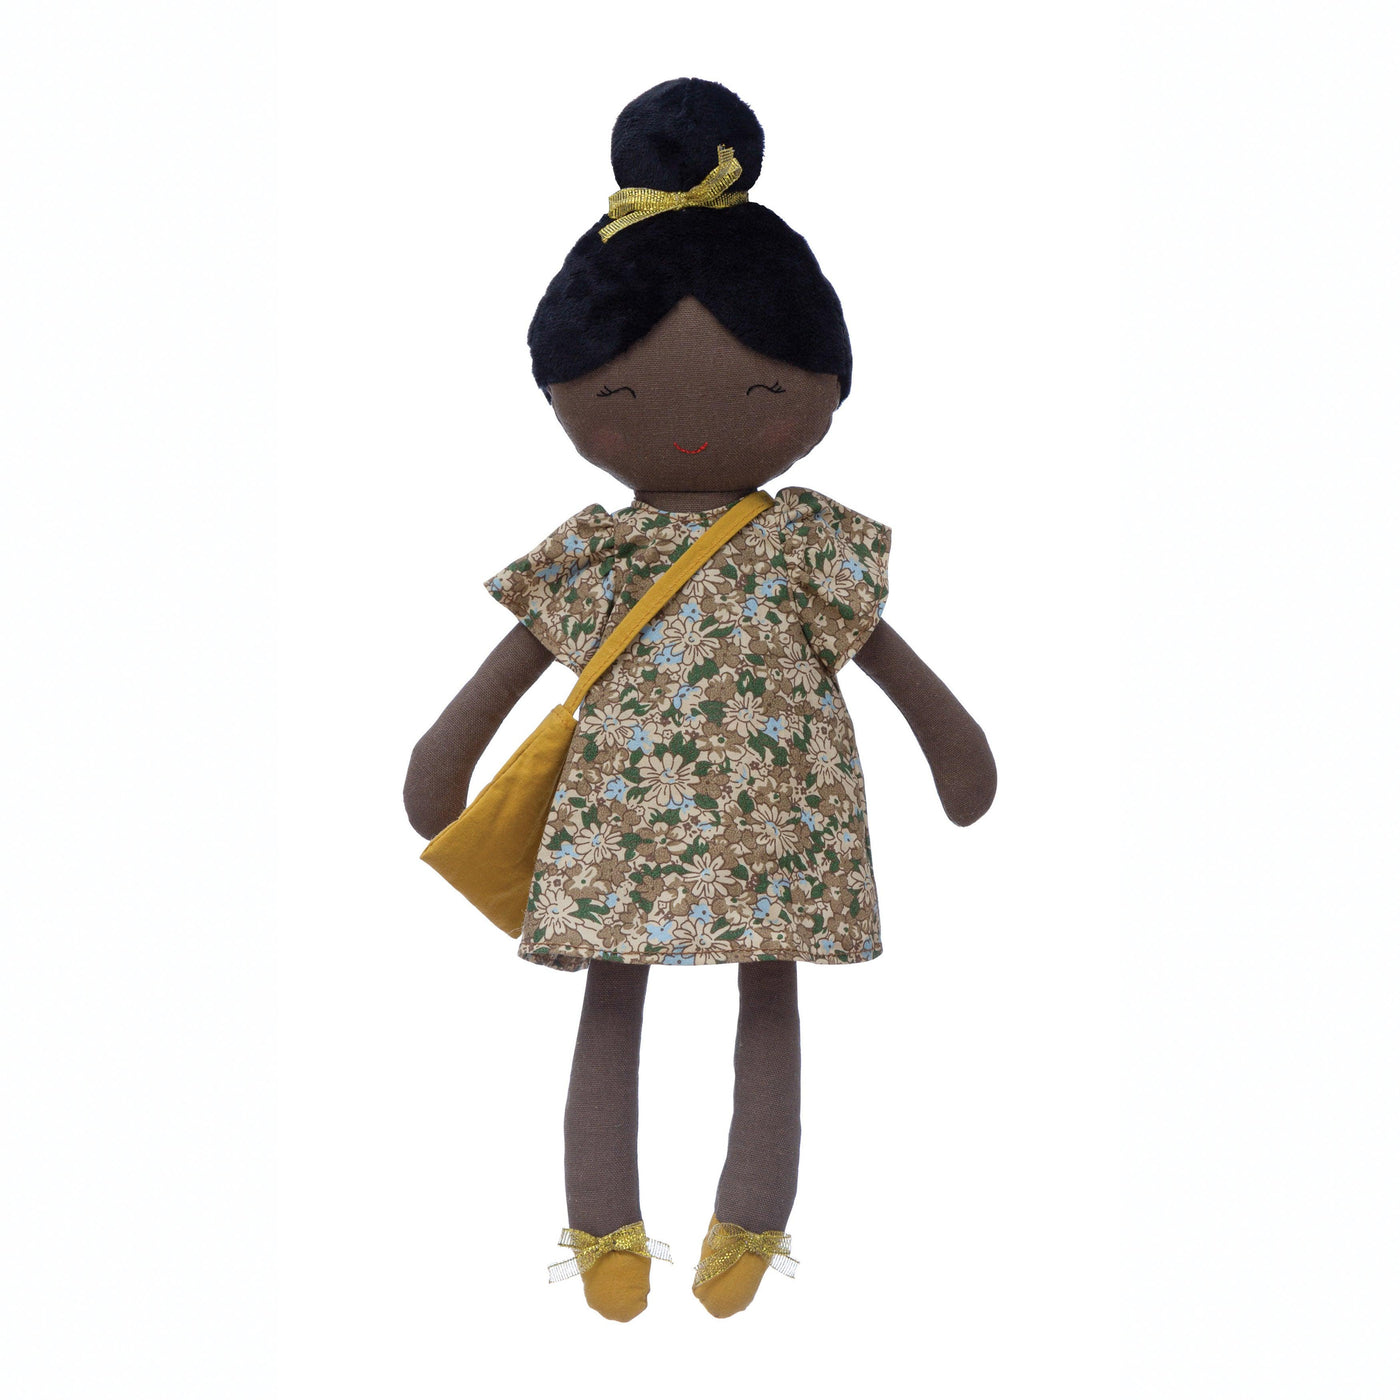 Fabric Doll in Floral Dress with Purse - Birch and Bind